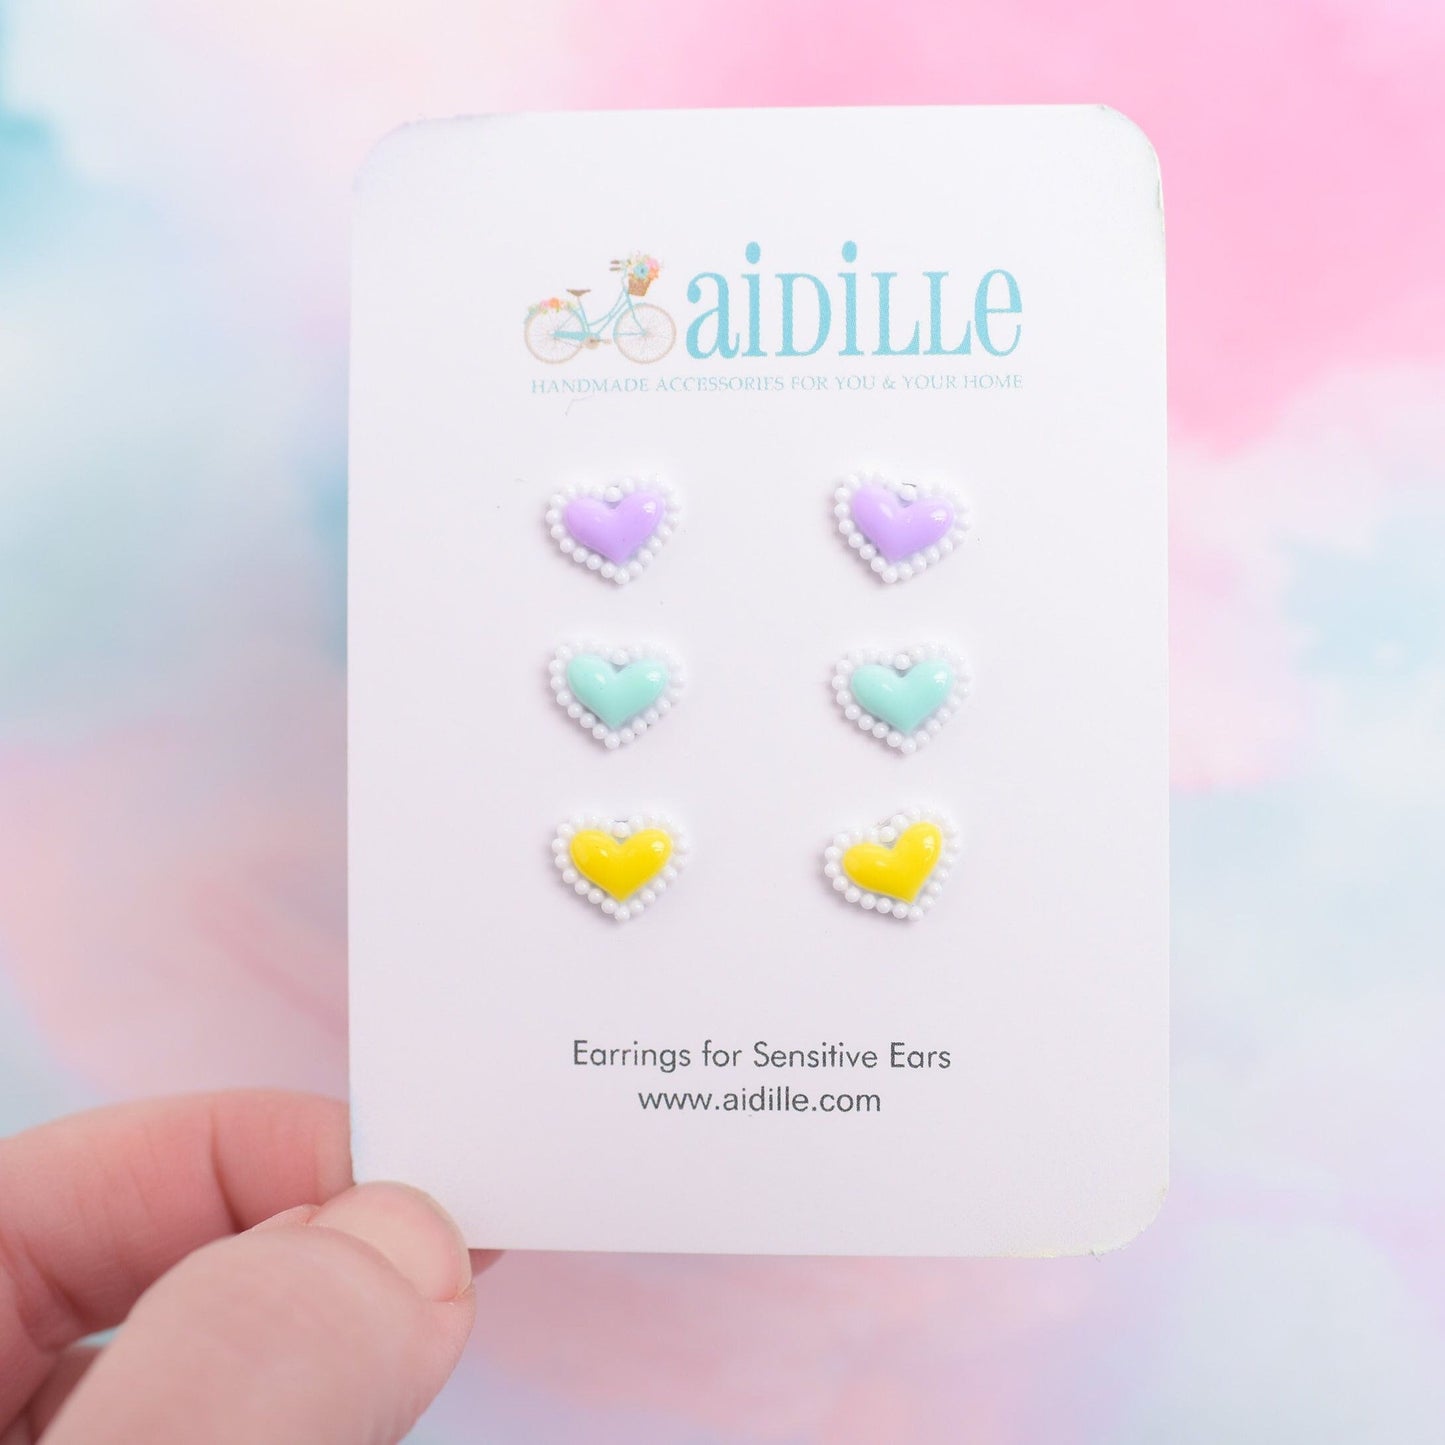 Little Scalloped Heart Earring Trio in Pastel Shades